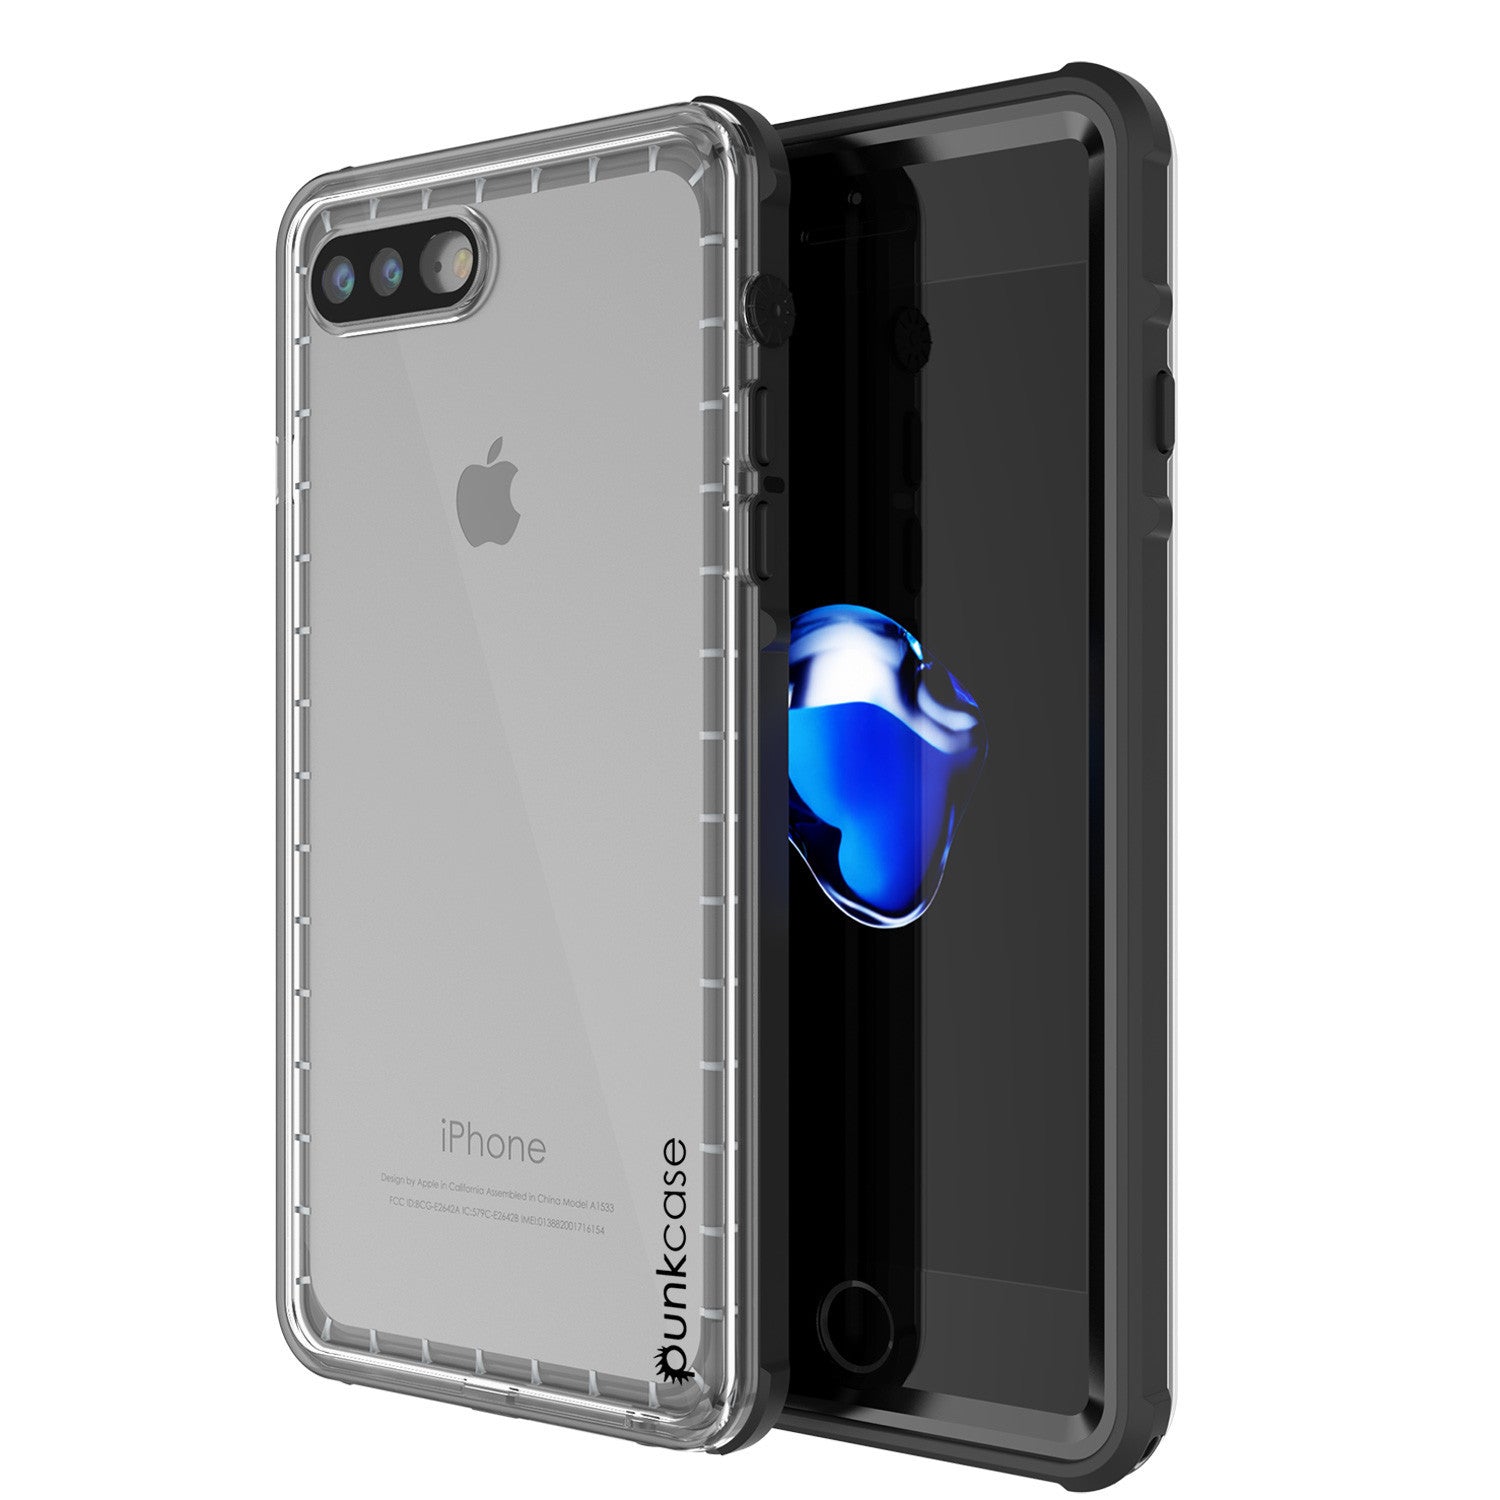 iPhone 7+ Plus Waterproof Case, PUNKcase CRYSTAL Black W/ Attached Screen Protector  | Warranty (Color in image: black)